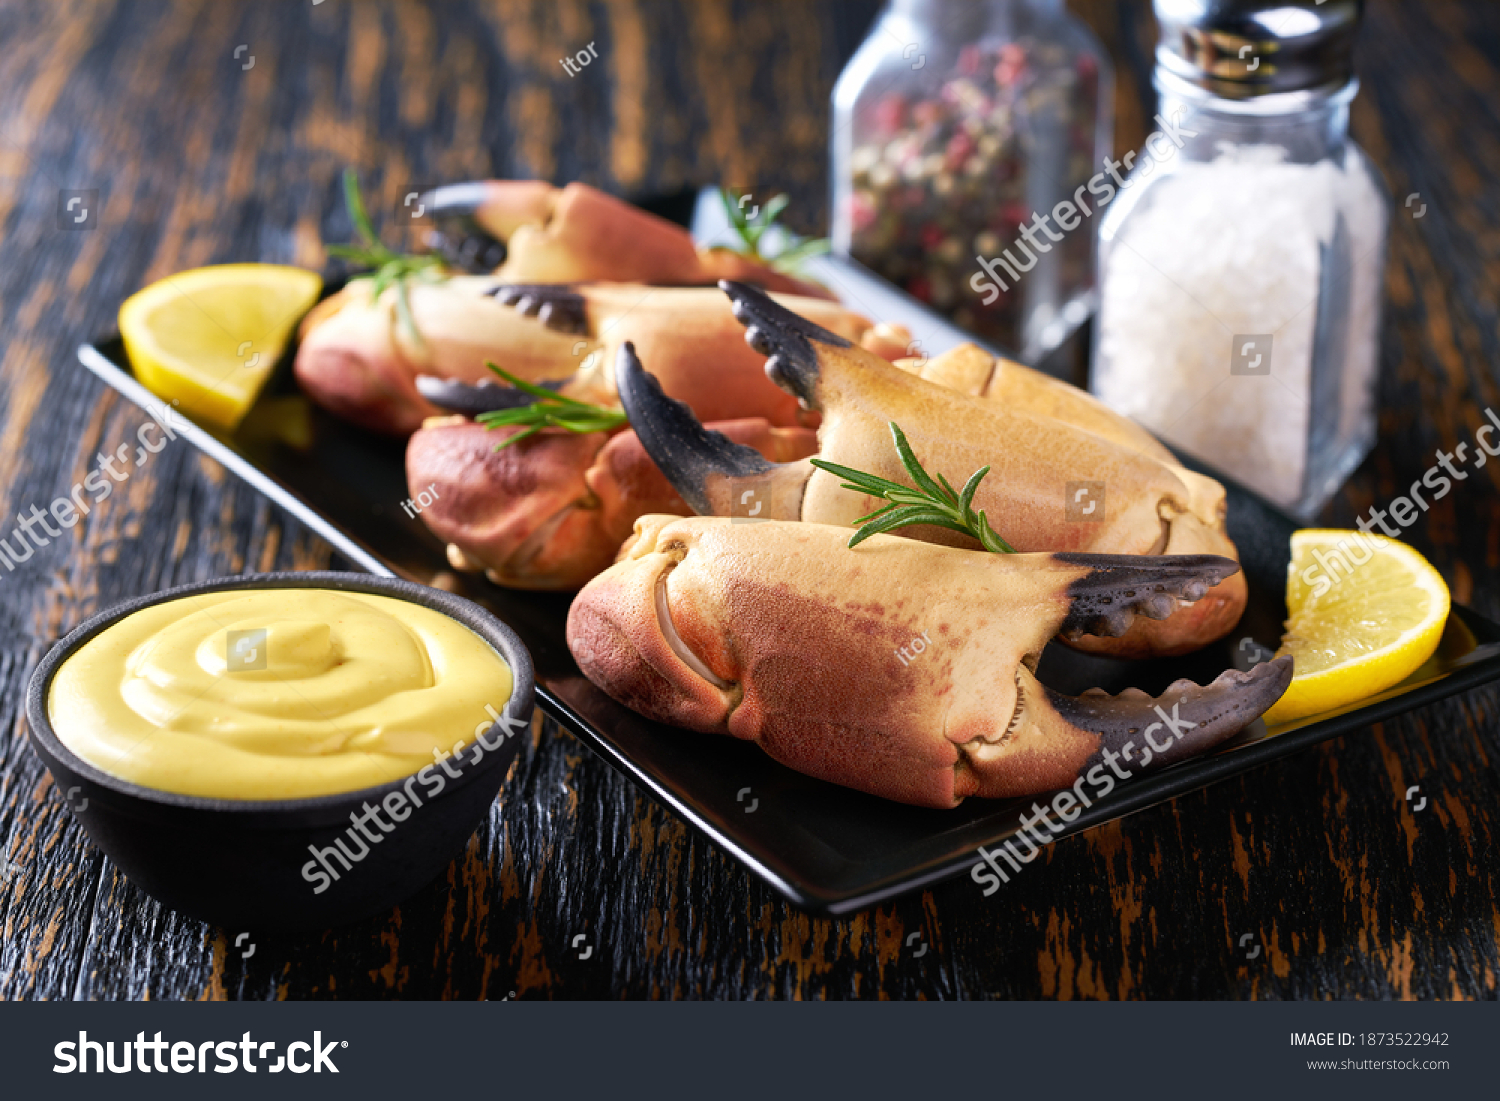 crab claws with  mustard sauce , lemon and rosemary  in a restaurant, close-up. #1873522942